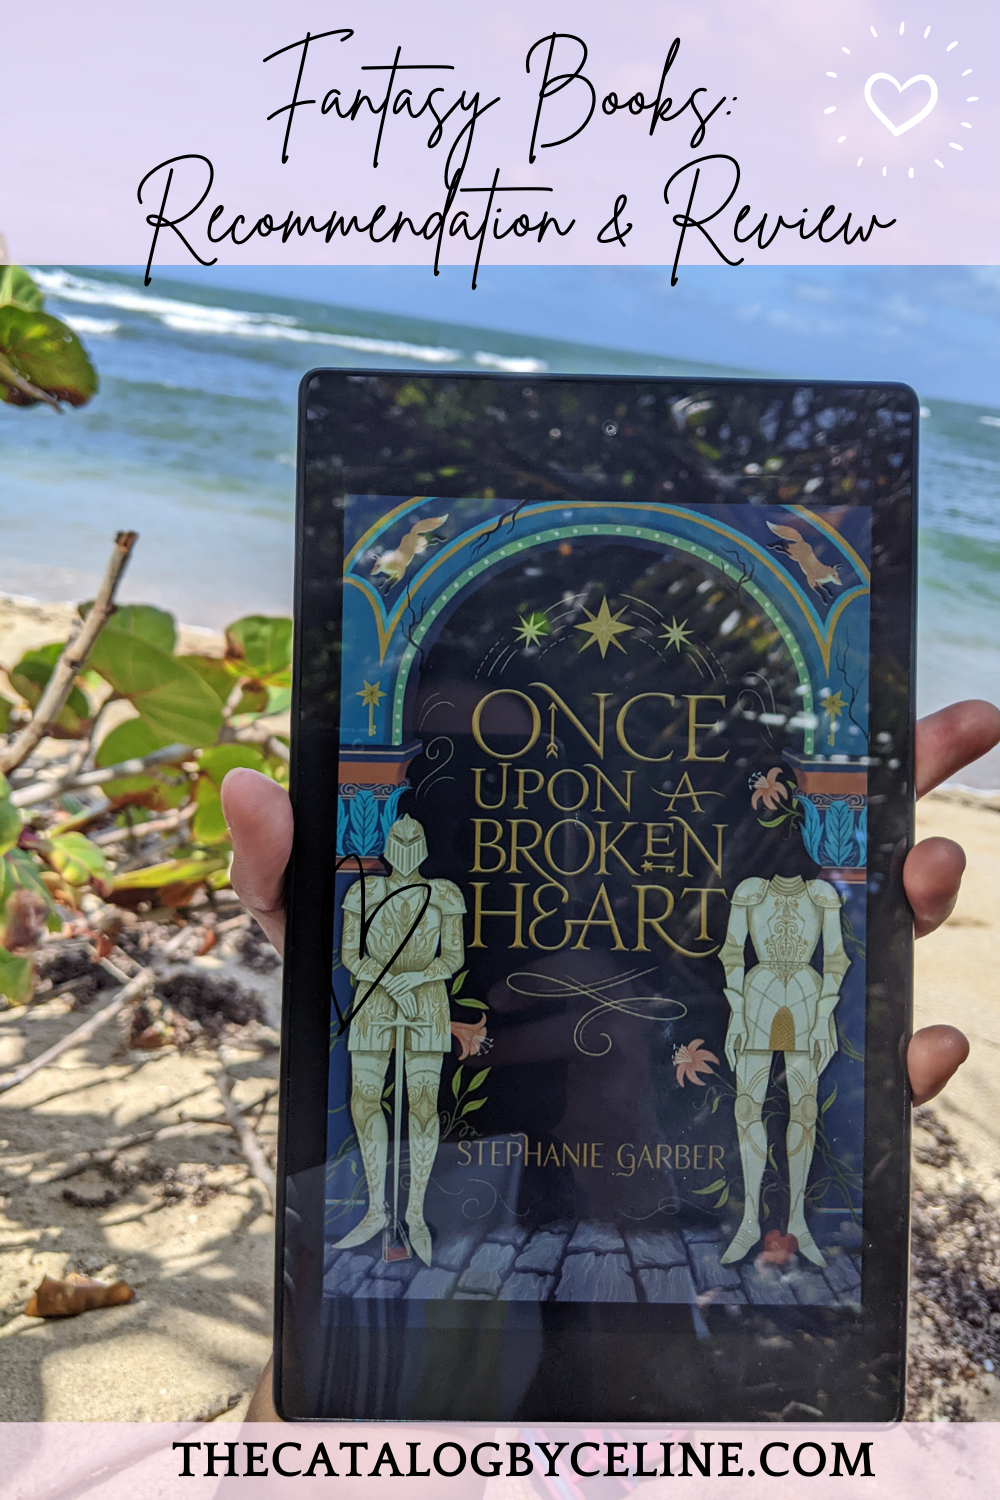 Fantasy Books: Once Upon A Broken Heart